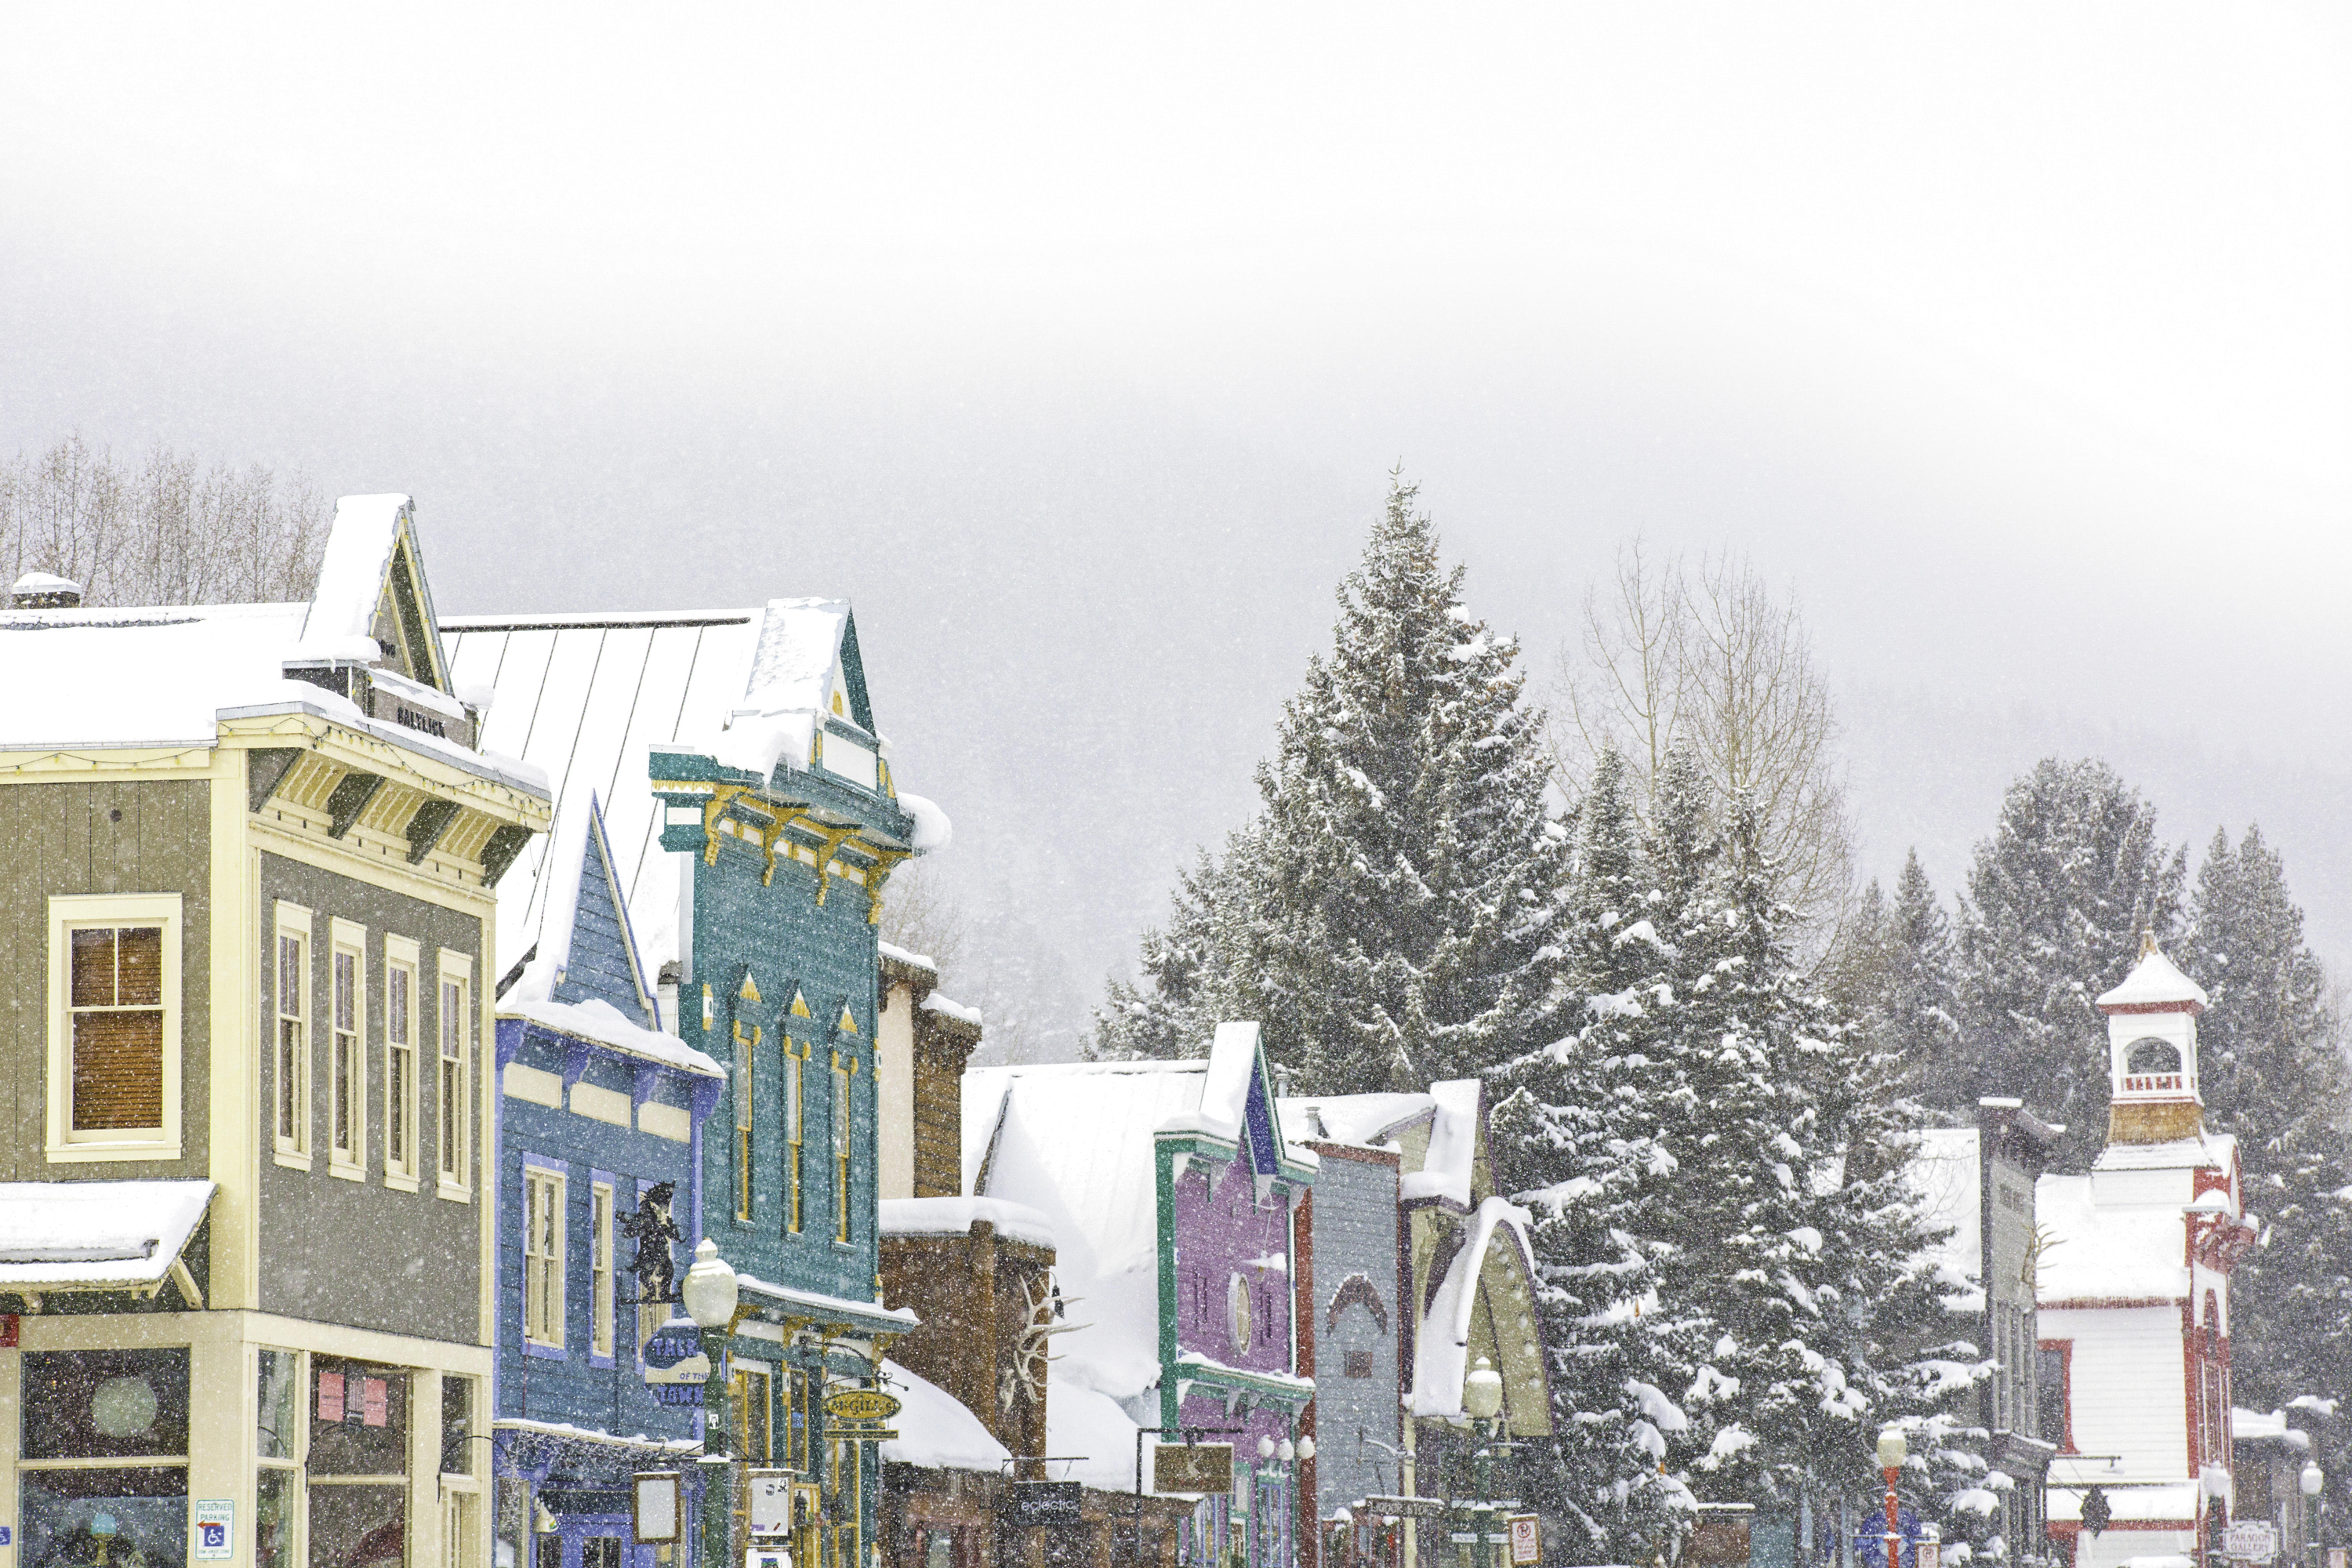 Fresh snowfall in the village at Crested Butte, CO.